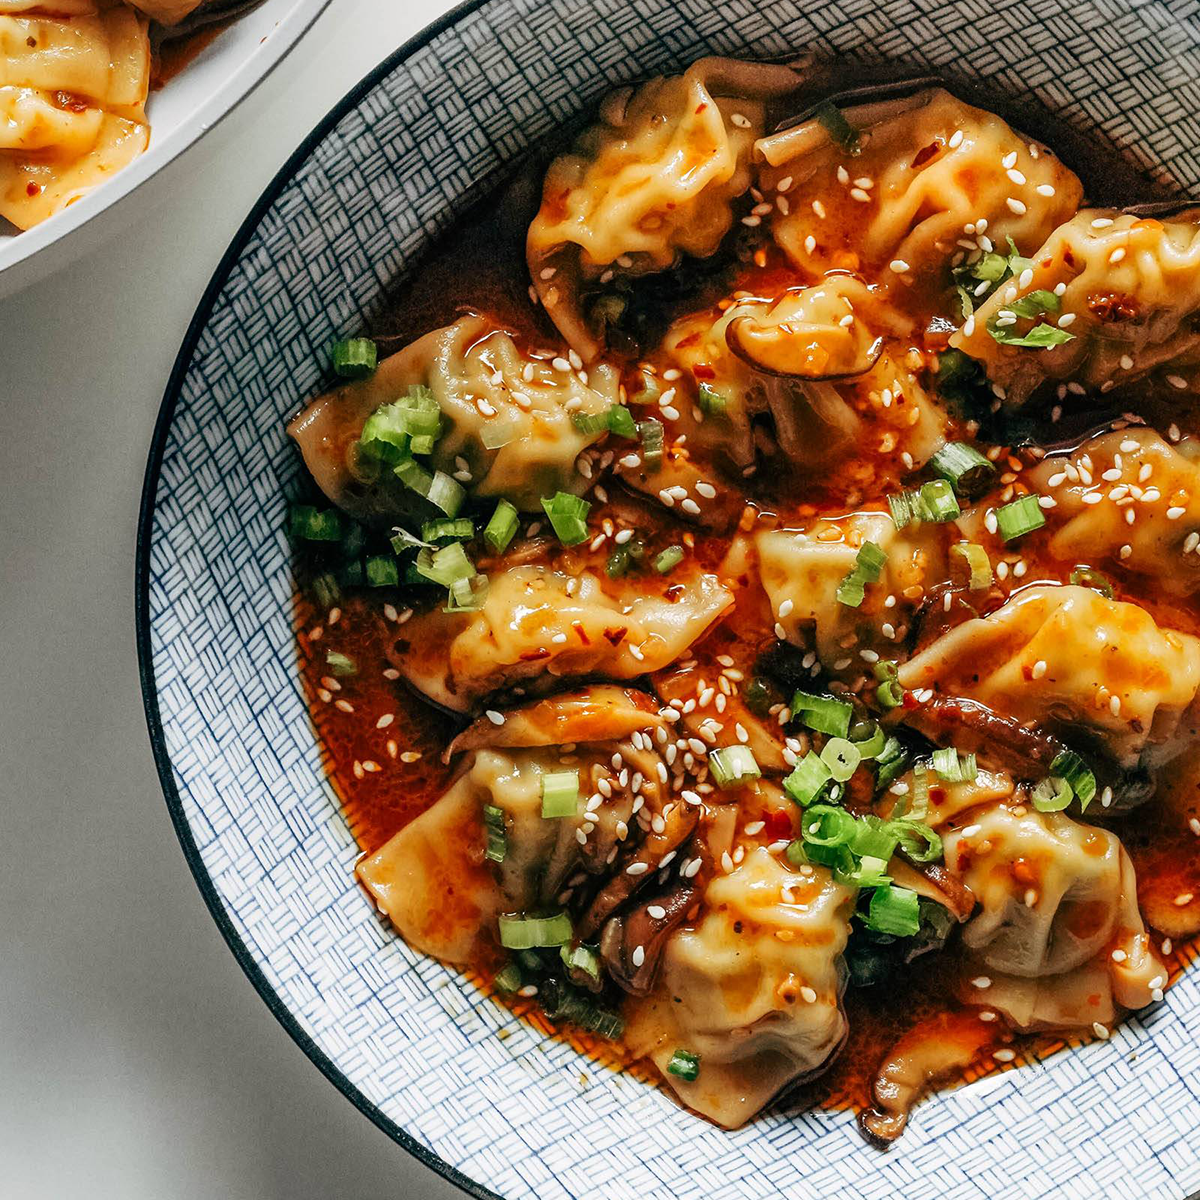 https://pinchofyum.com/wp-content/uploads/Chicken-Wontons-in-Spicy-Chili-Sauce-Square.png